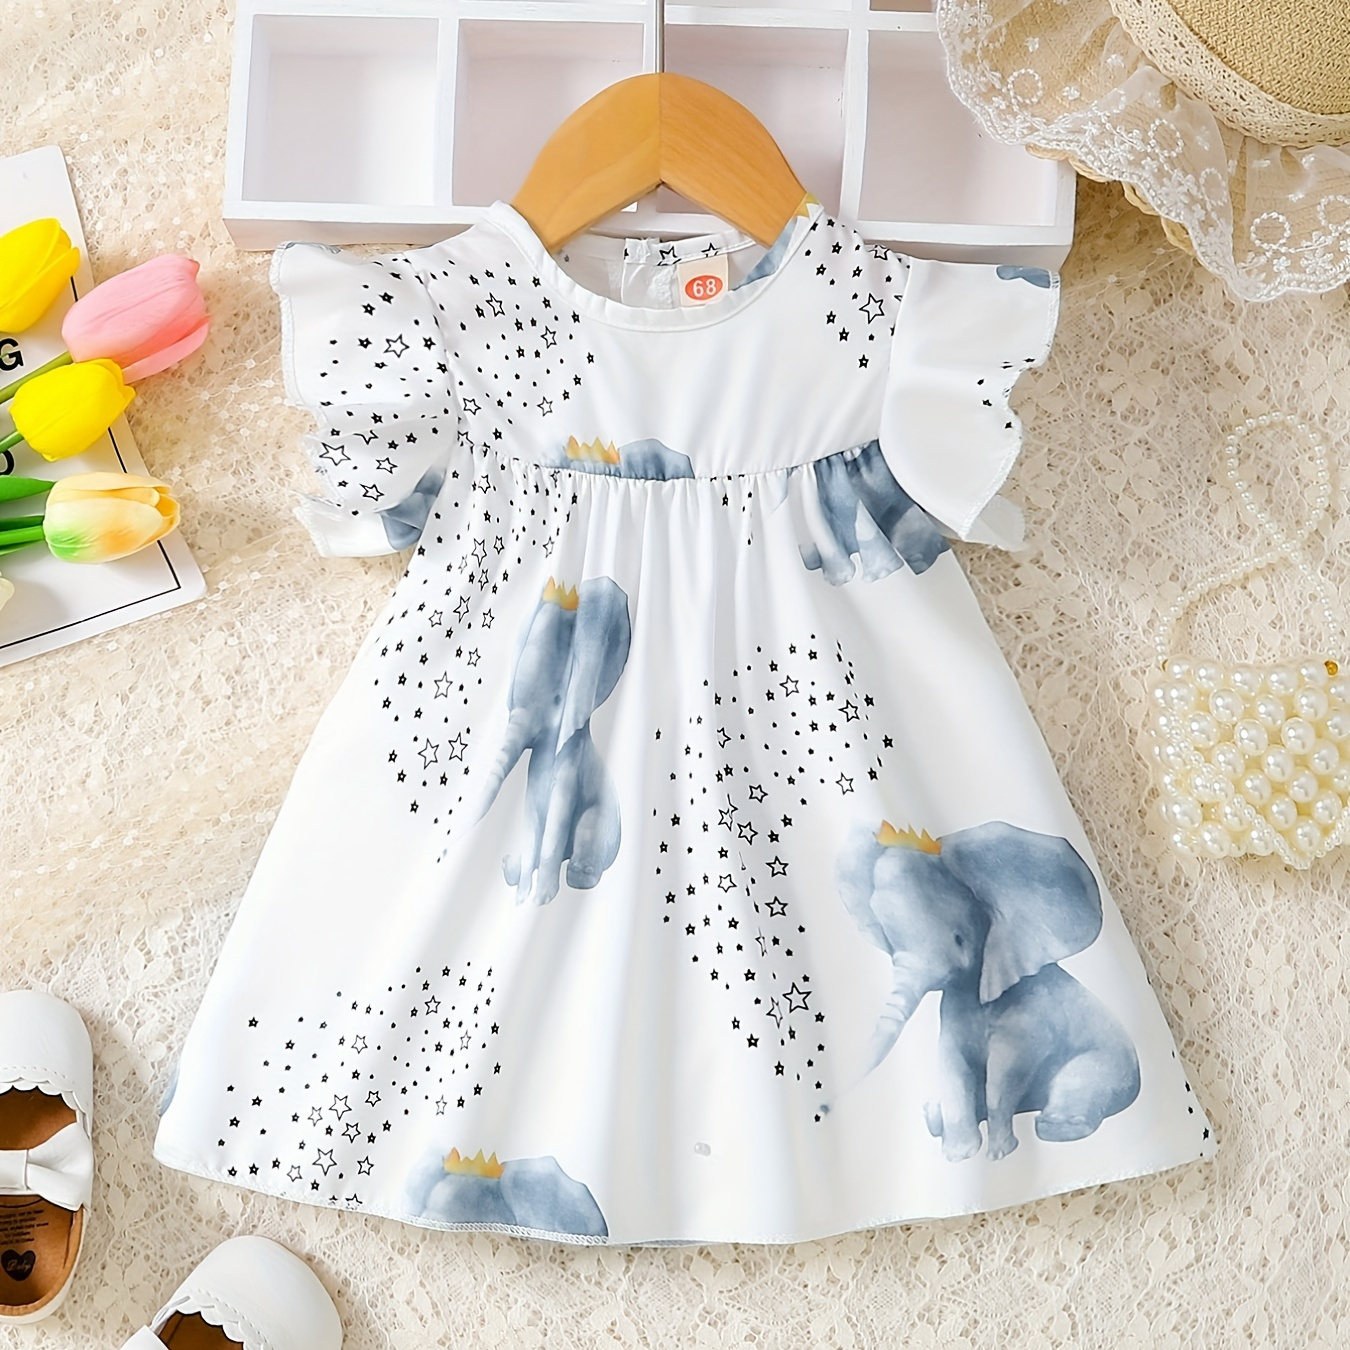 

Baby Cute Star Elephant Print Small Flutter Sleeve Dress Comfy Summer Crew Neck Clothes